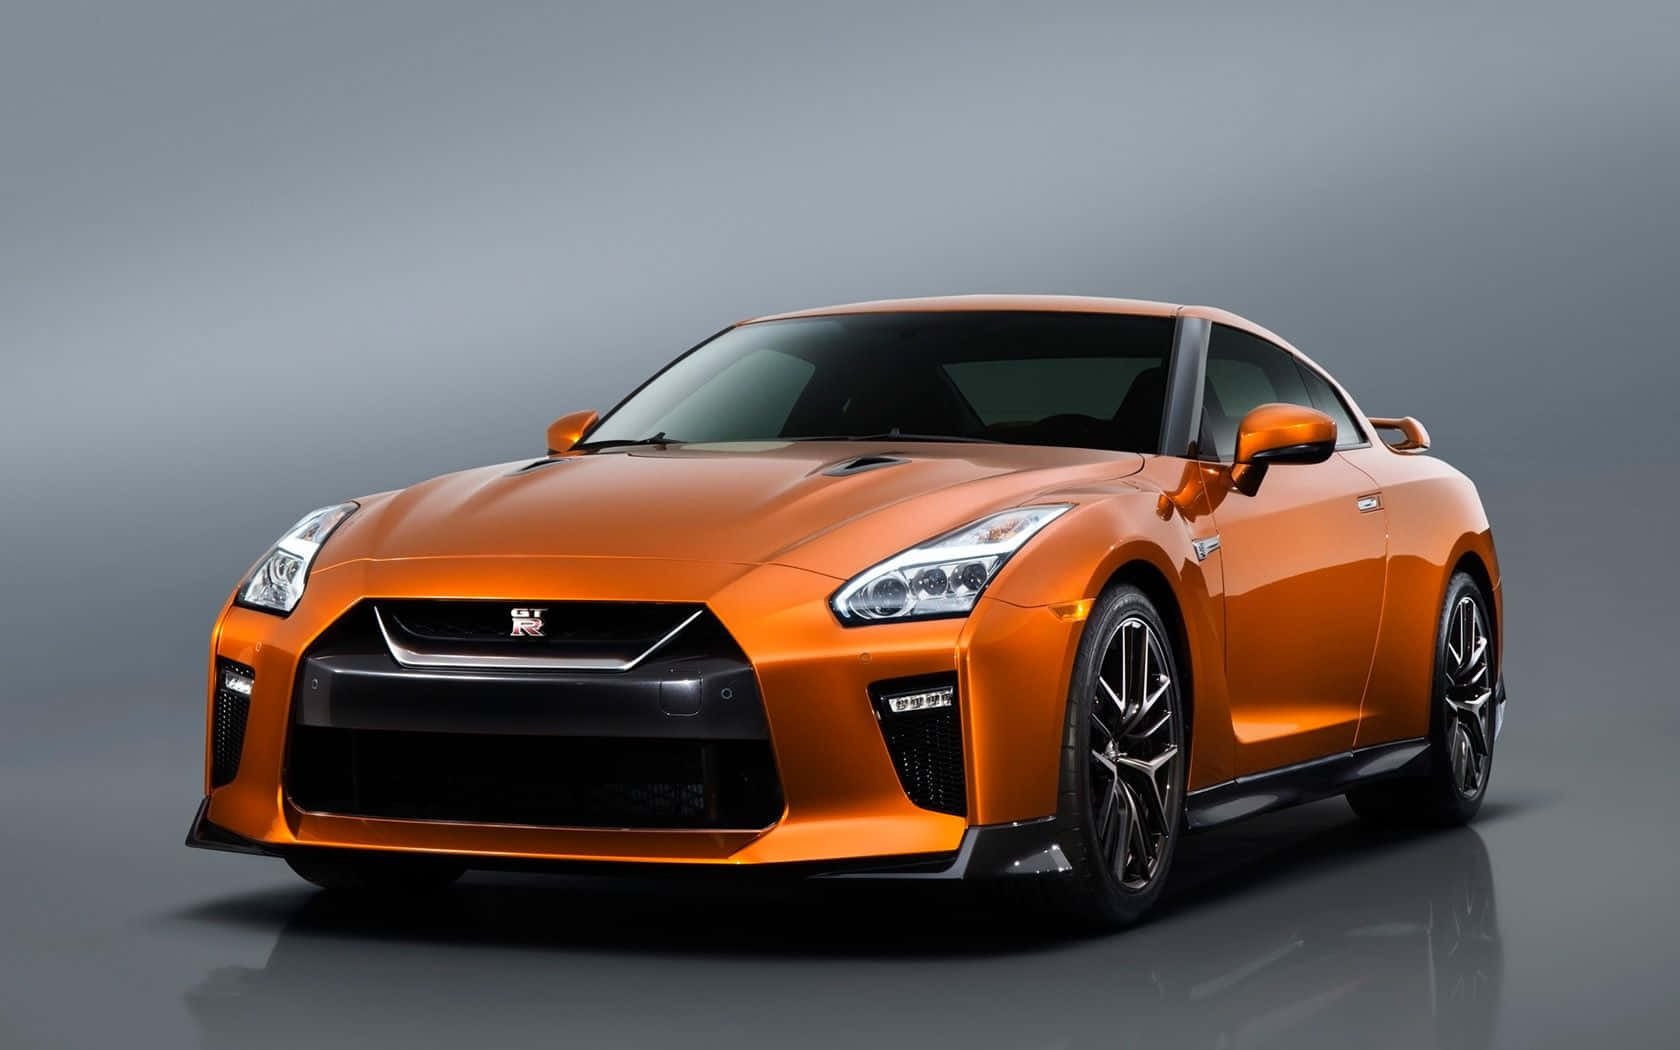 This Cool Gtr Will Make You Feel Like A Formula One Driver Wallpaper